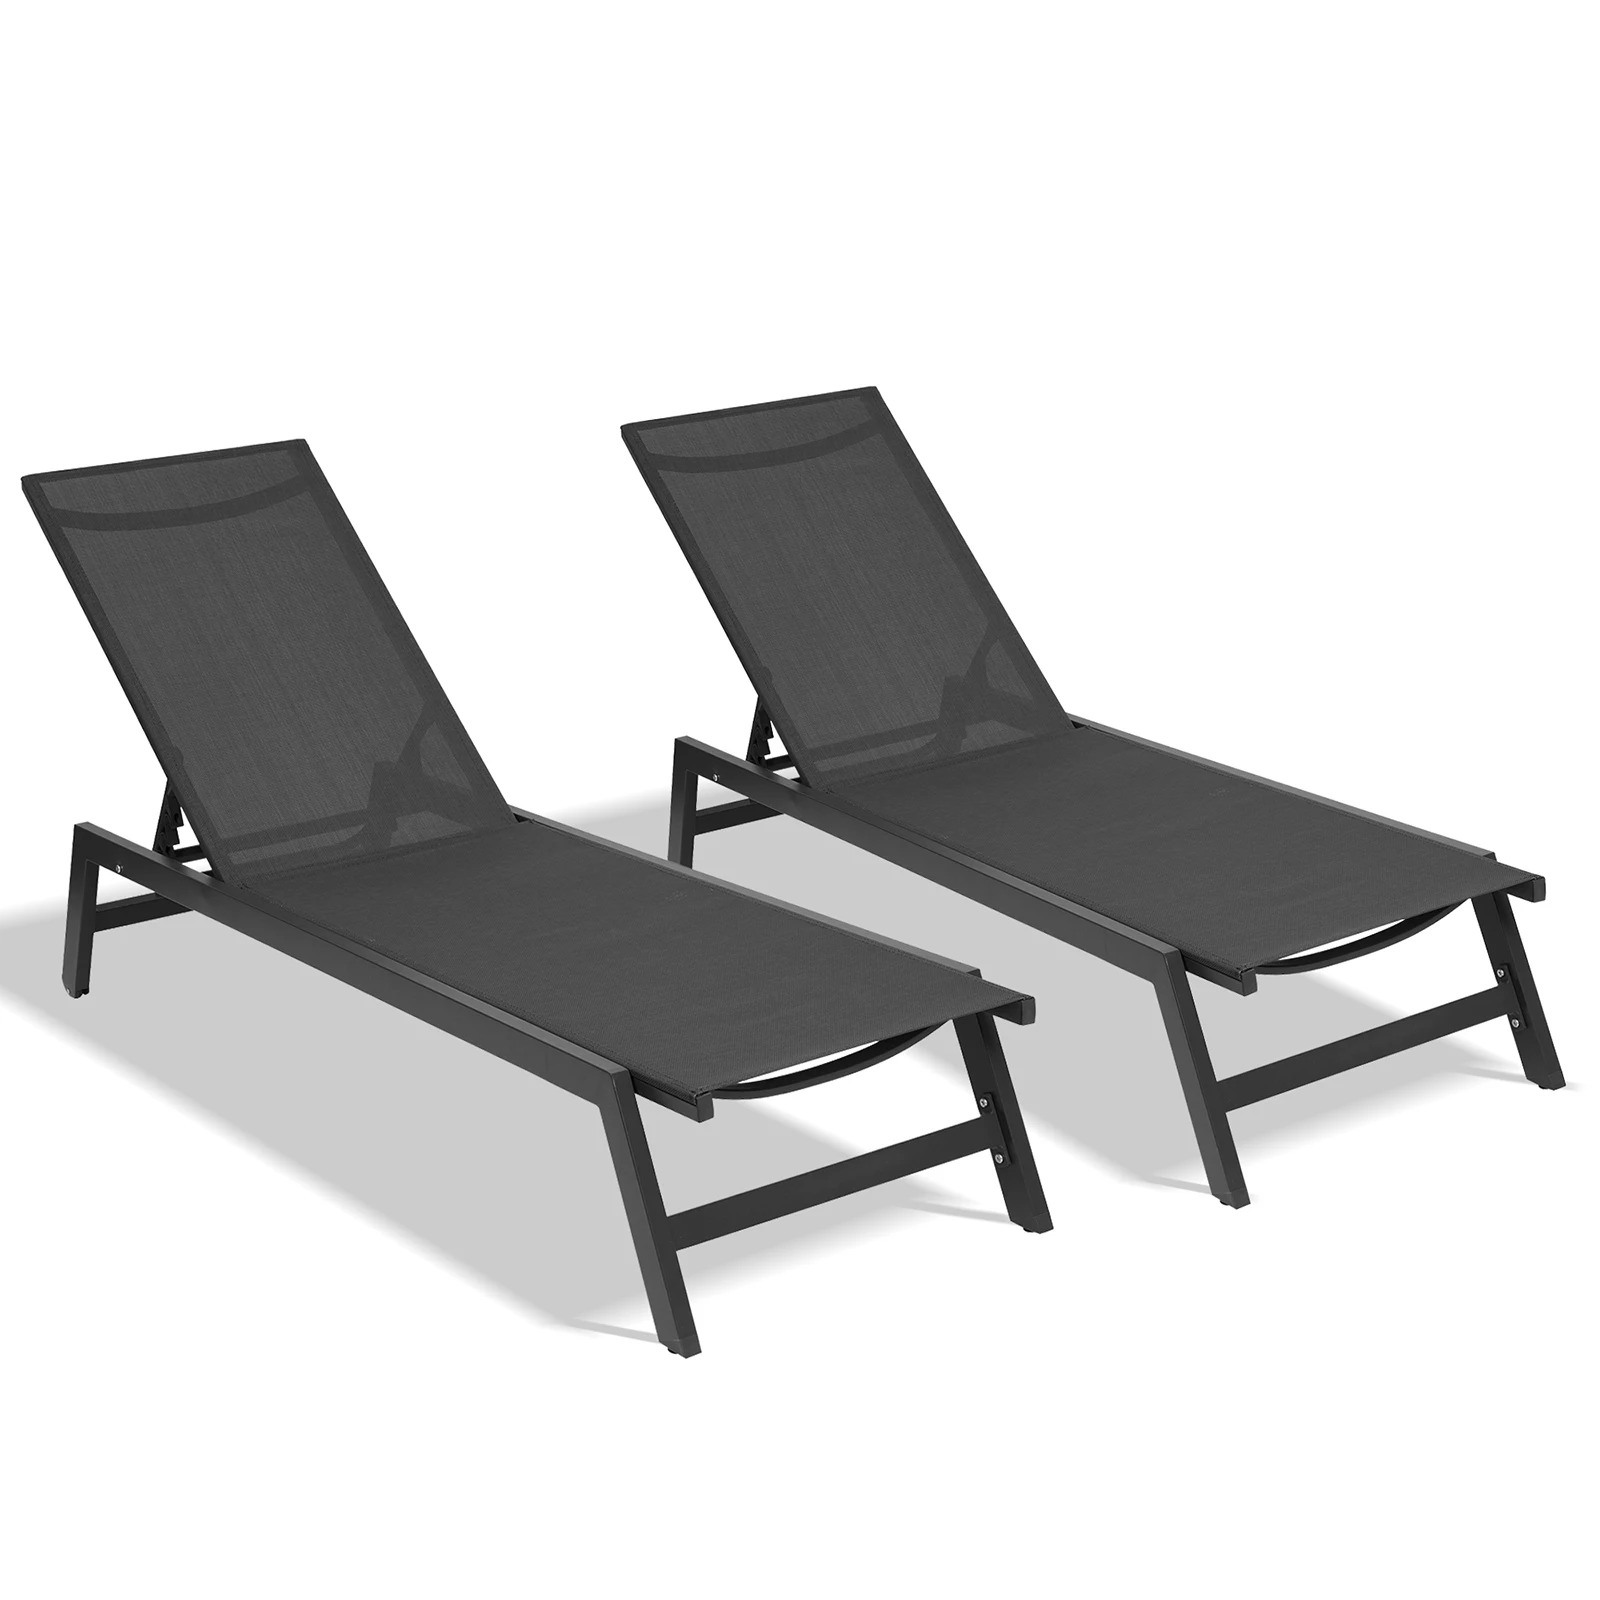 

Outdoor 2-Pcs Set Chaise Lounge Chairs Five-Position Adjustable Aluminum Recliner, All Weather For Patio, Beach, Yard, Pool